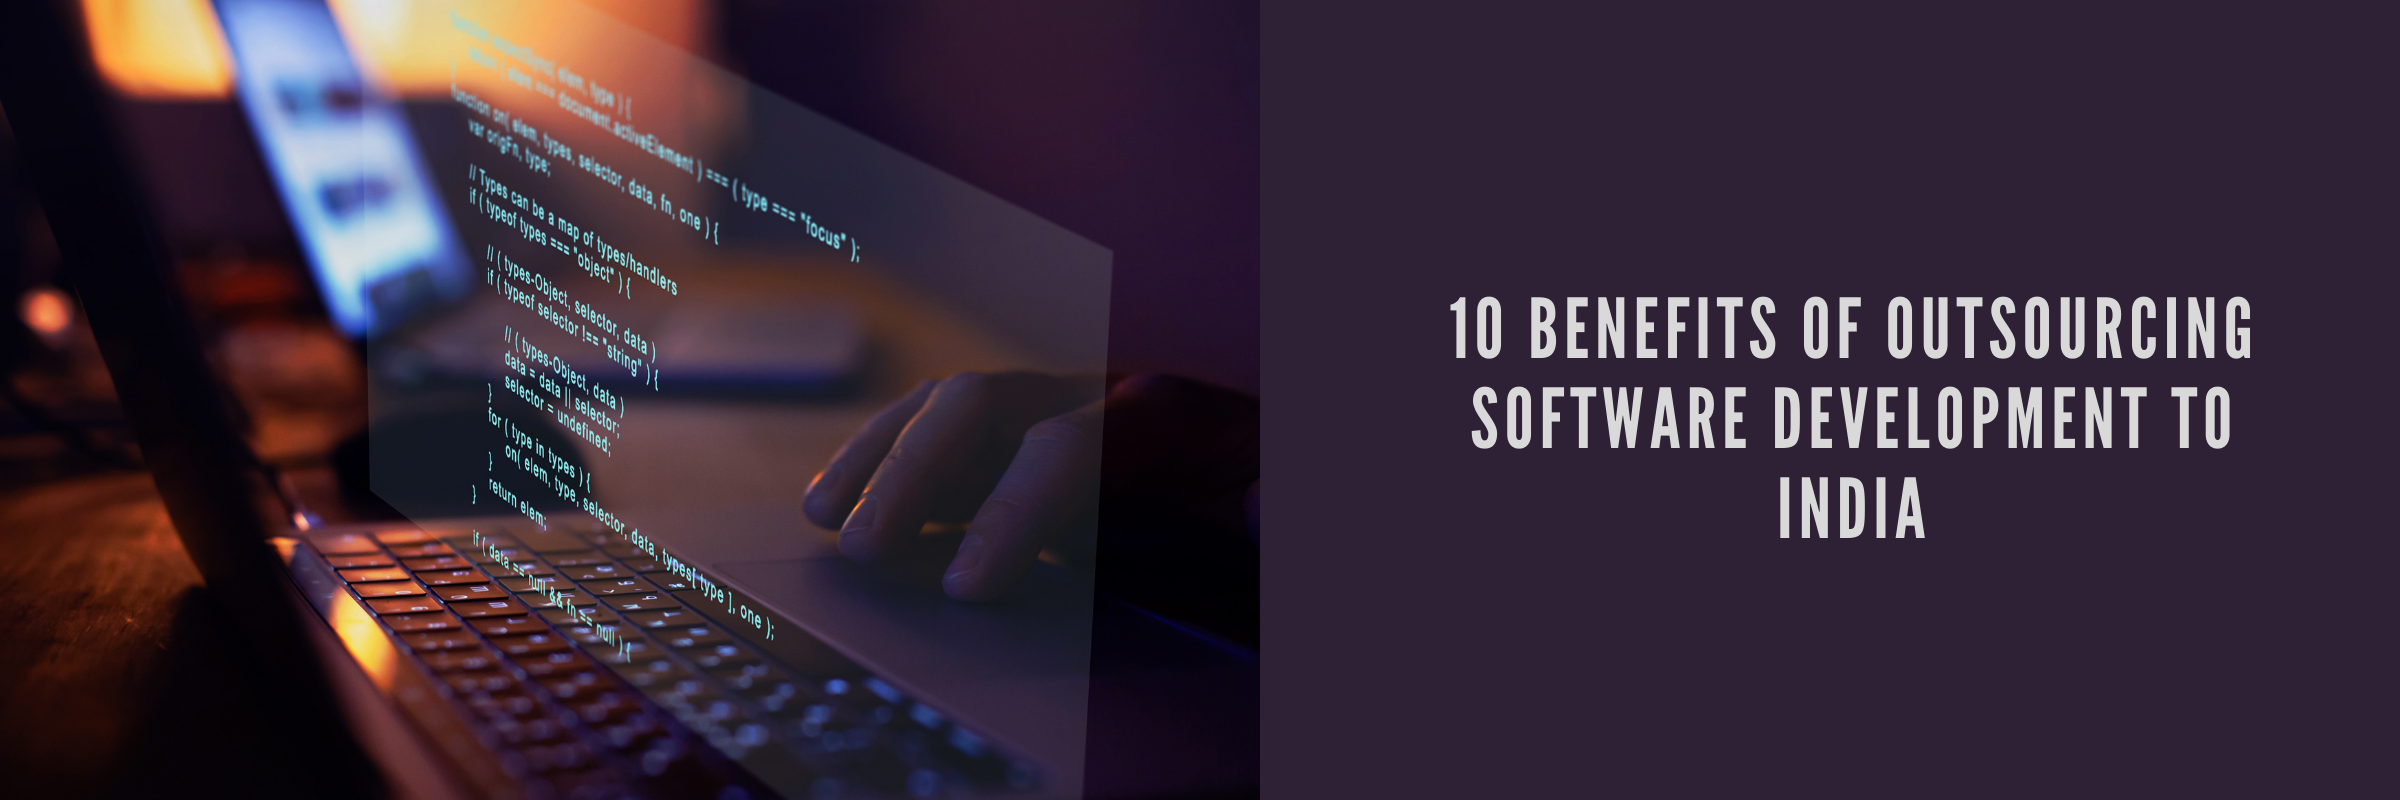 10 Benefits of outsourcing software development to India